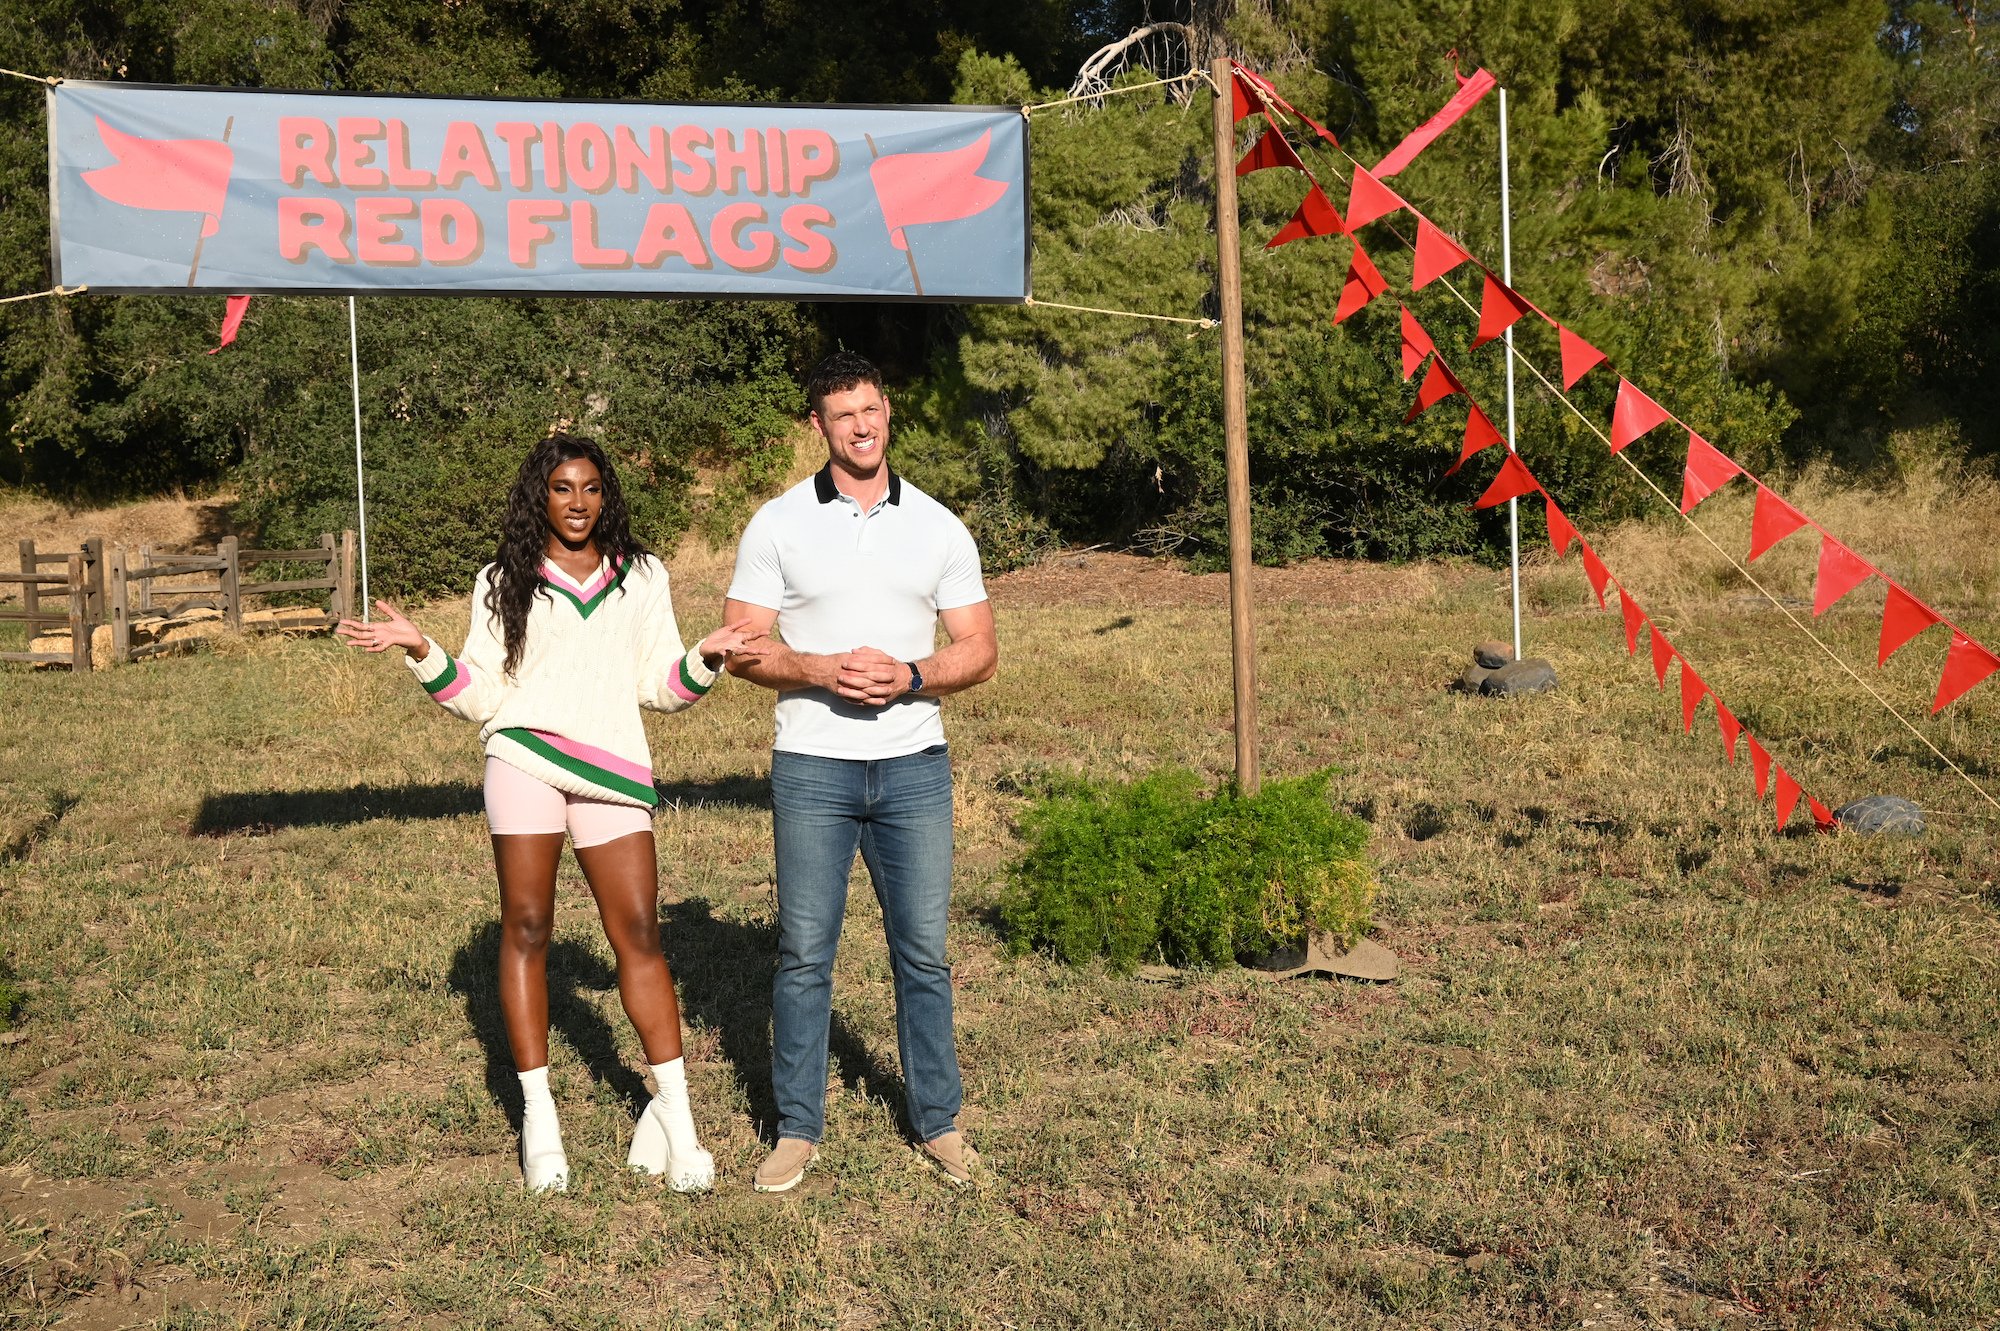 'The Bachelor' 2022 star Clayton Echard standing under a sign that says 'Relationship Red Flag' with Ziwe Fumudoh